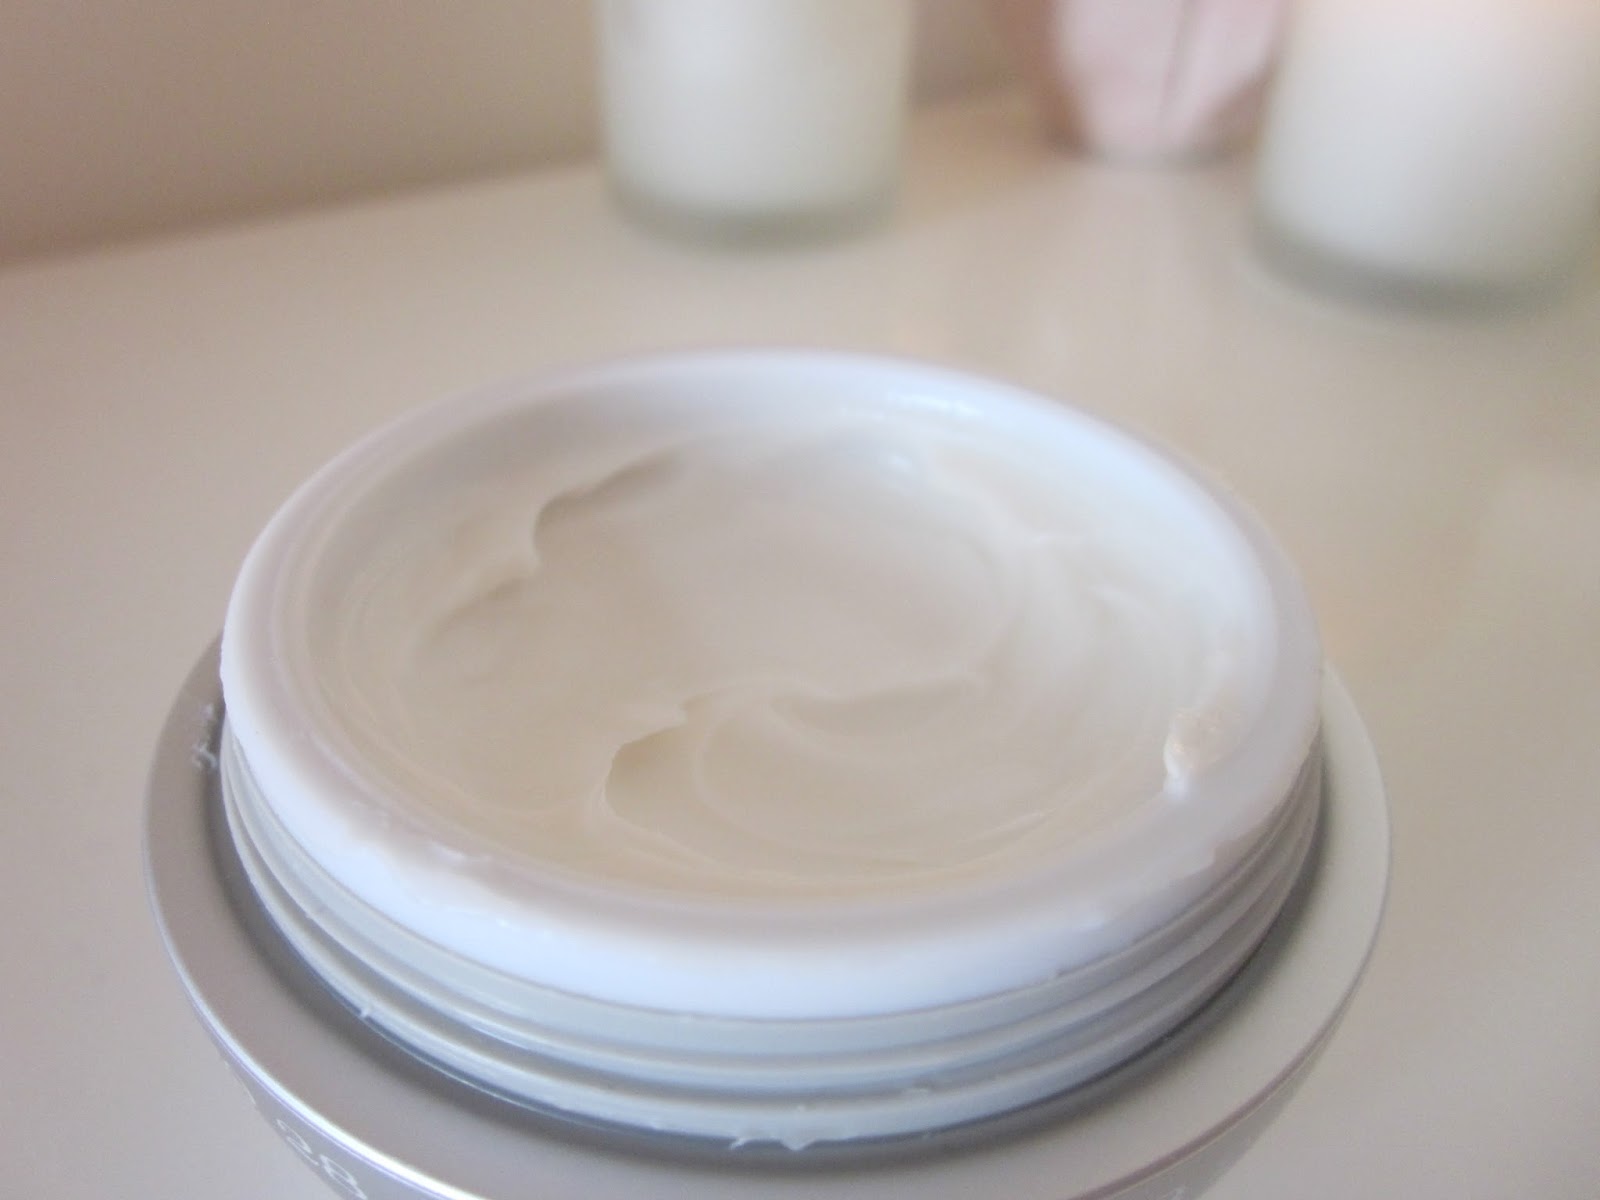 lulu's time bomb neck jaw chest cream review